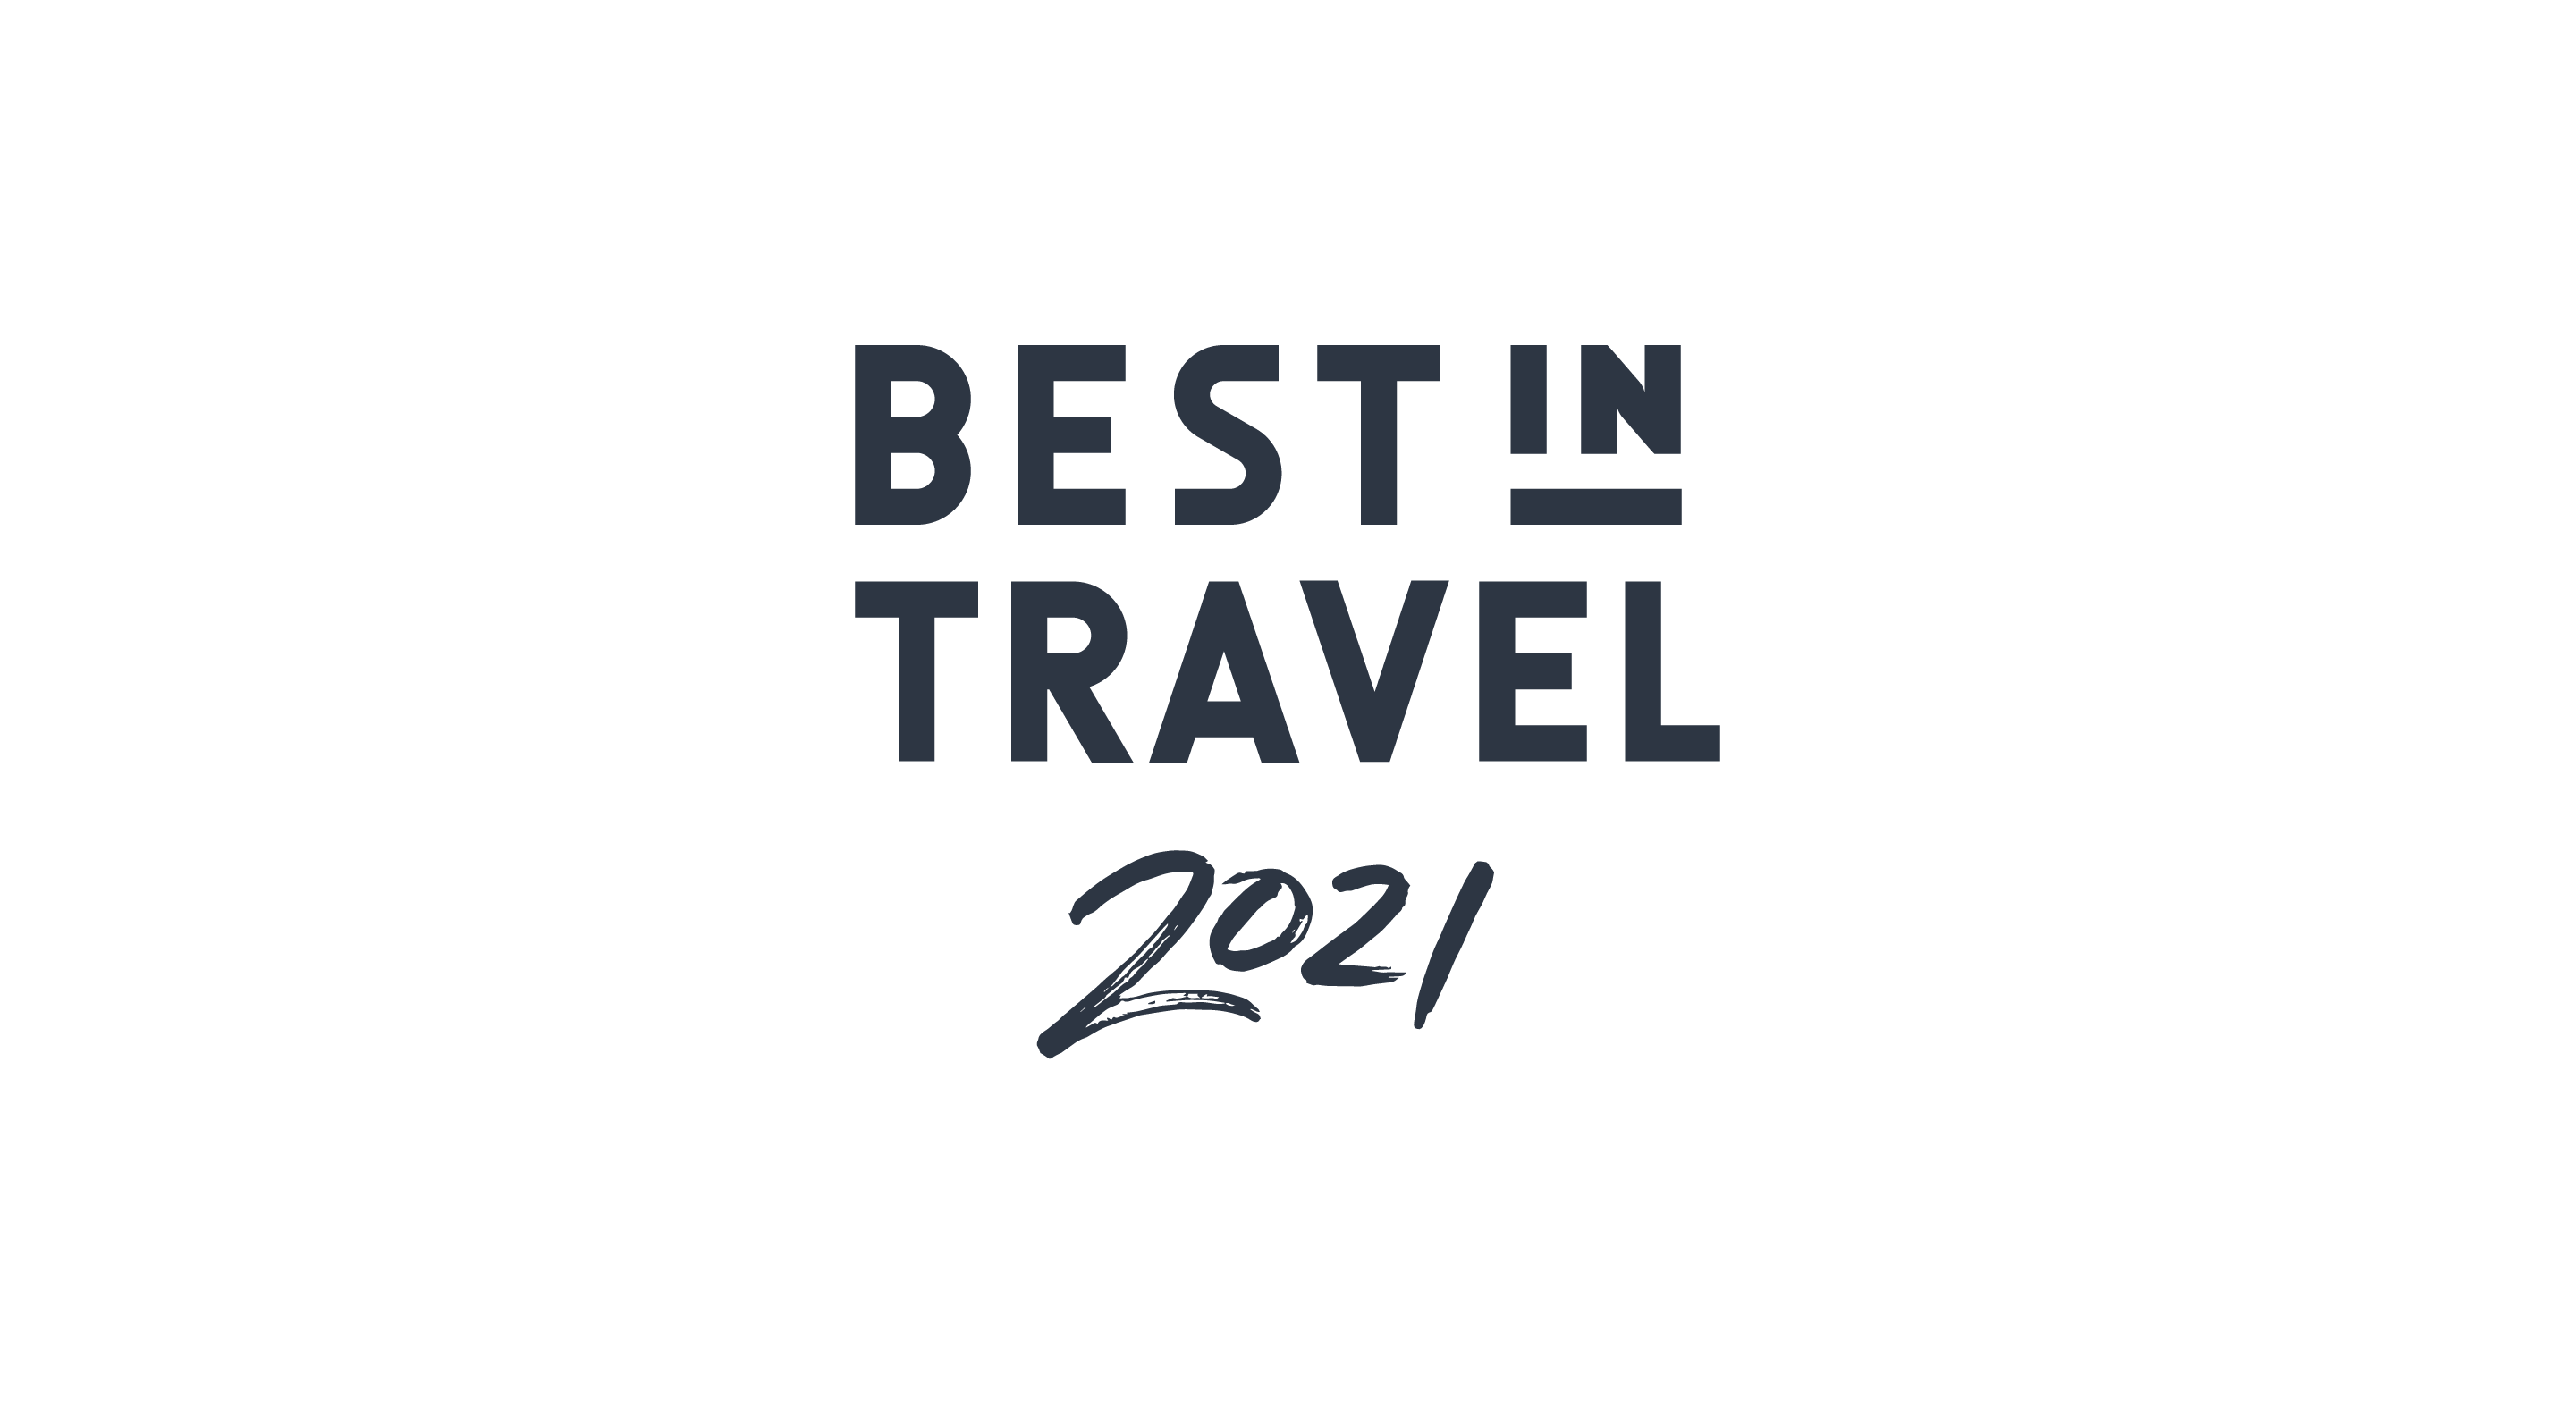 Best in travel 2021, Lonely Planet "lancia" il post-Covid